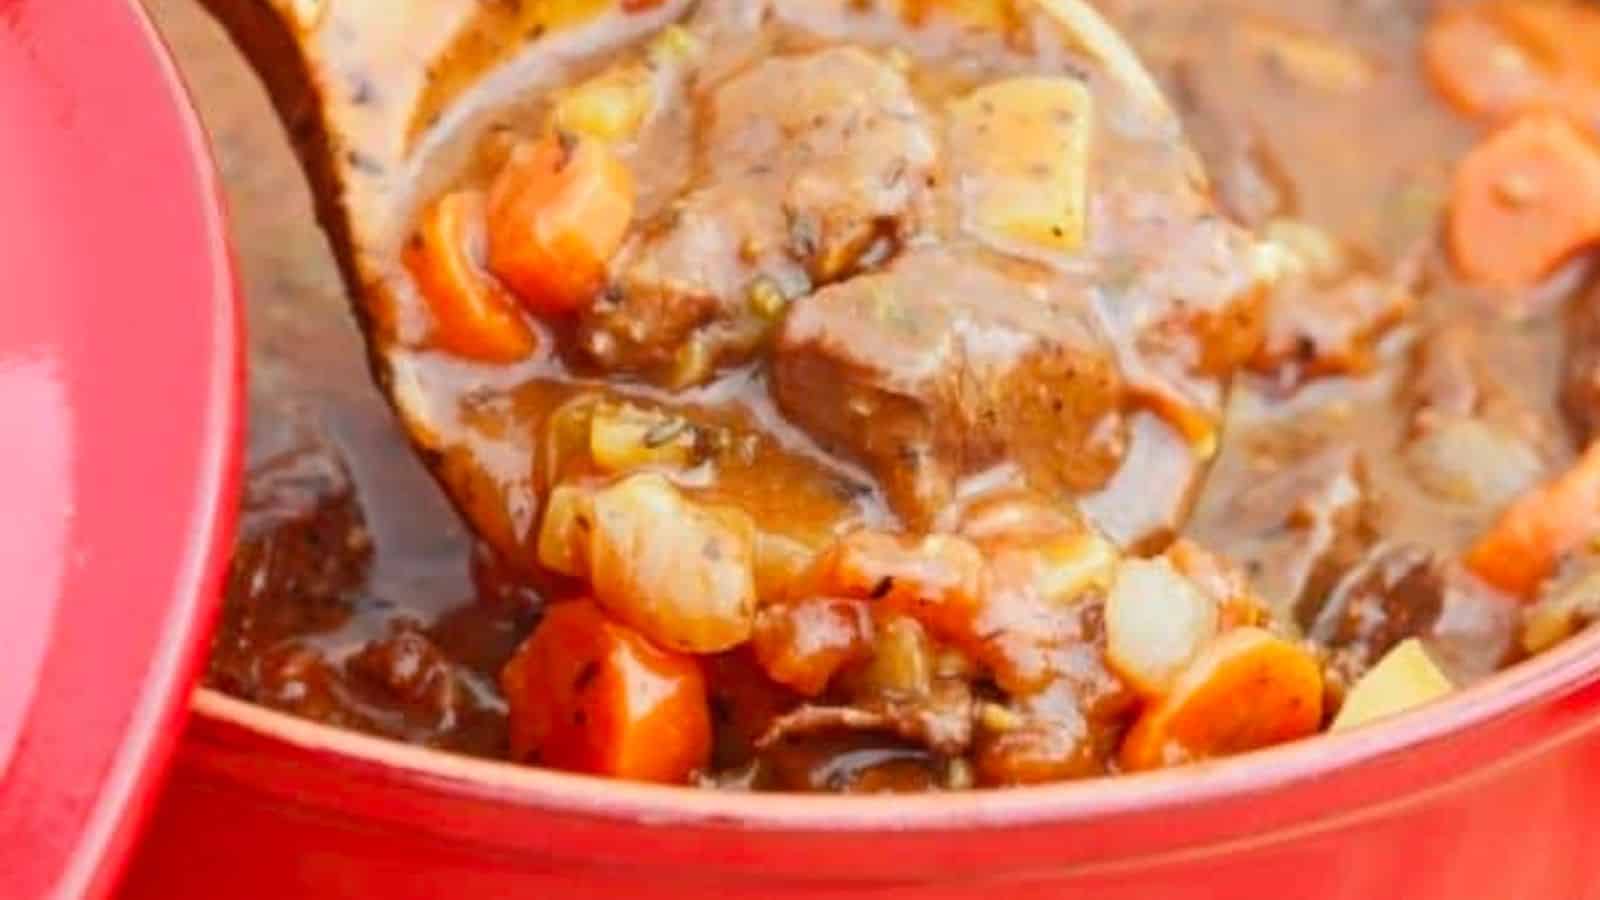 Venison stew in a red pot with a wooden spoon.